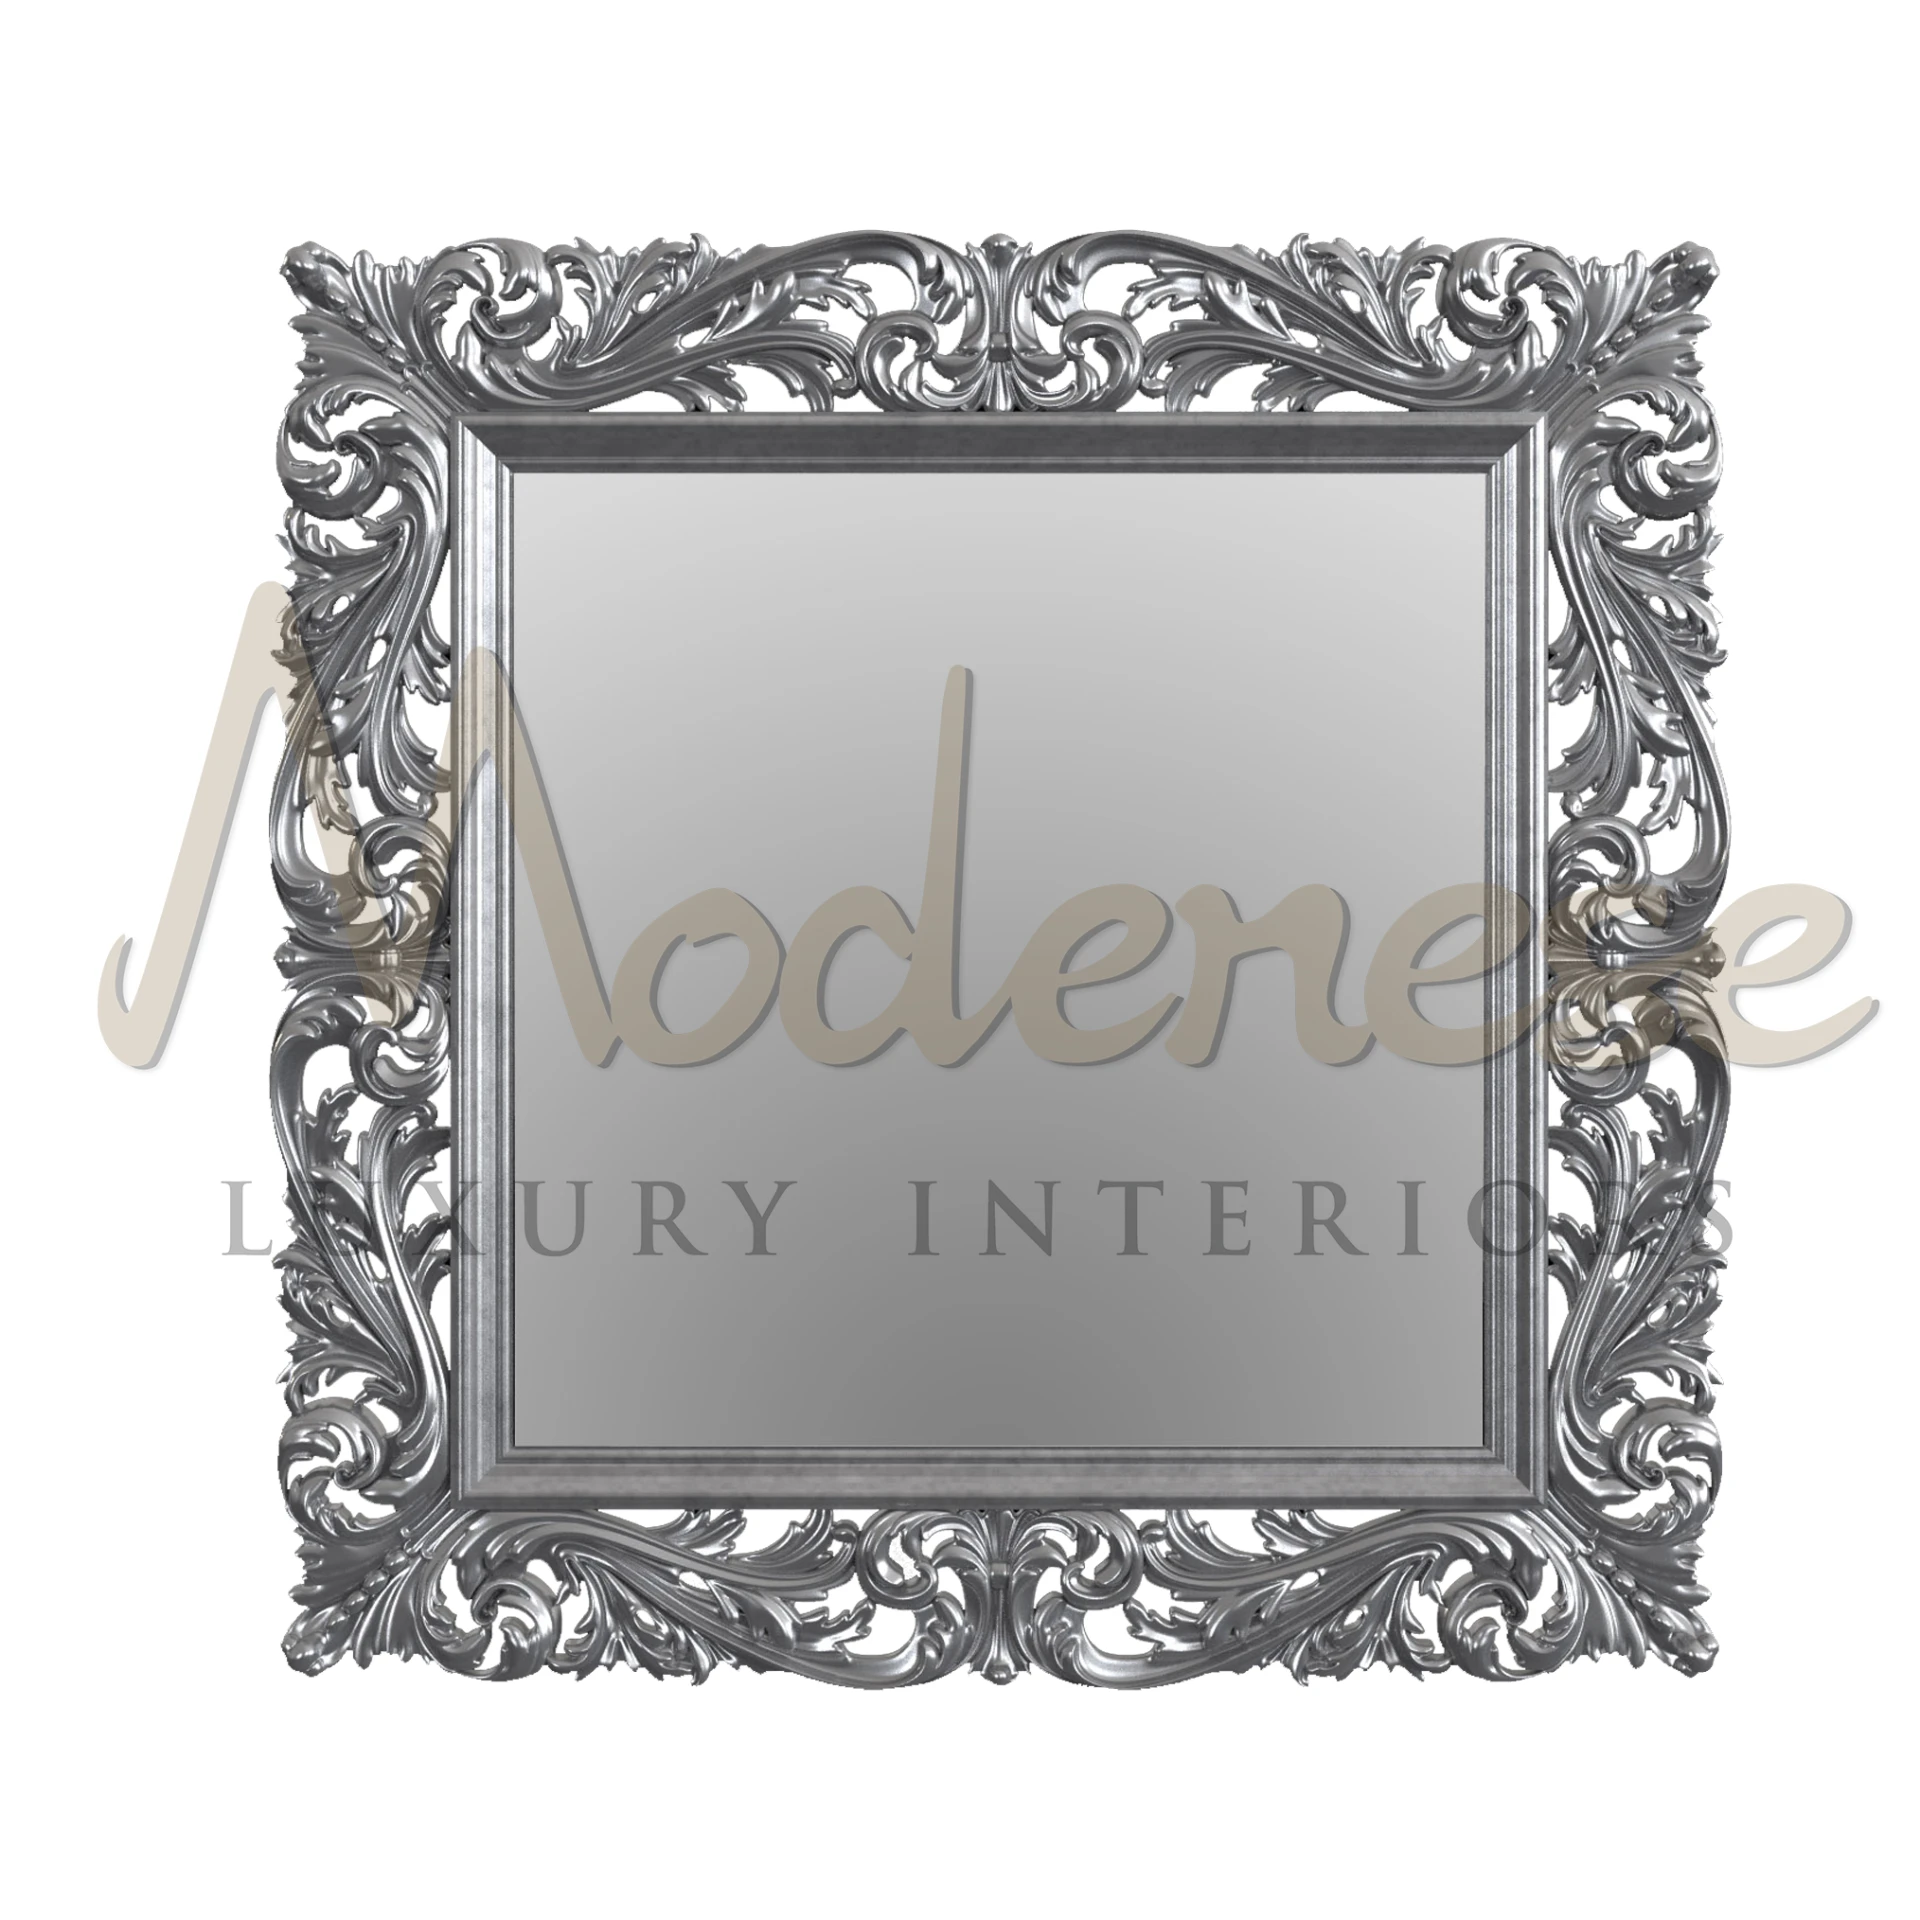 Silver Leaf Figured Mirror, a Modenese luxury, blends bespoke design with a stylish silver finish, perfect for elegant interior design.